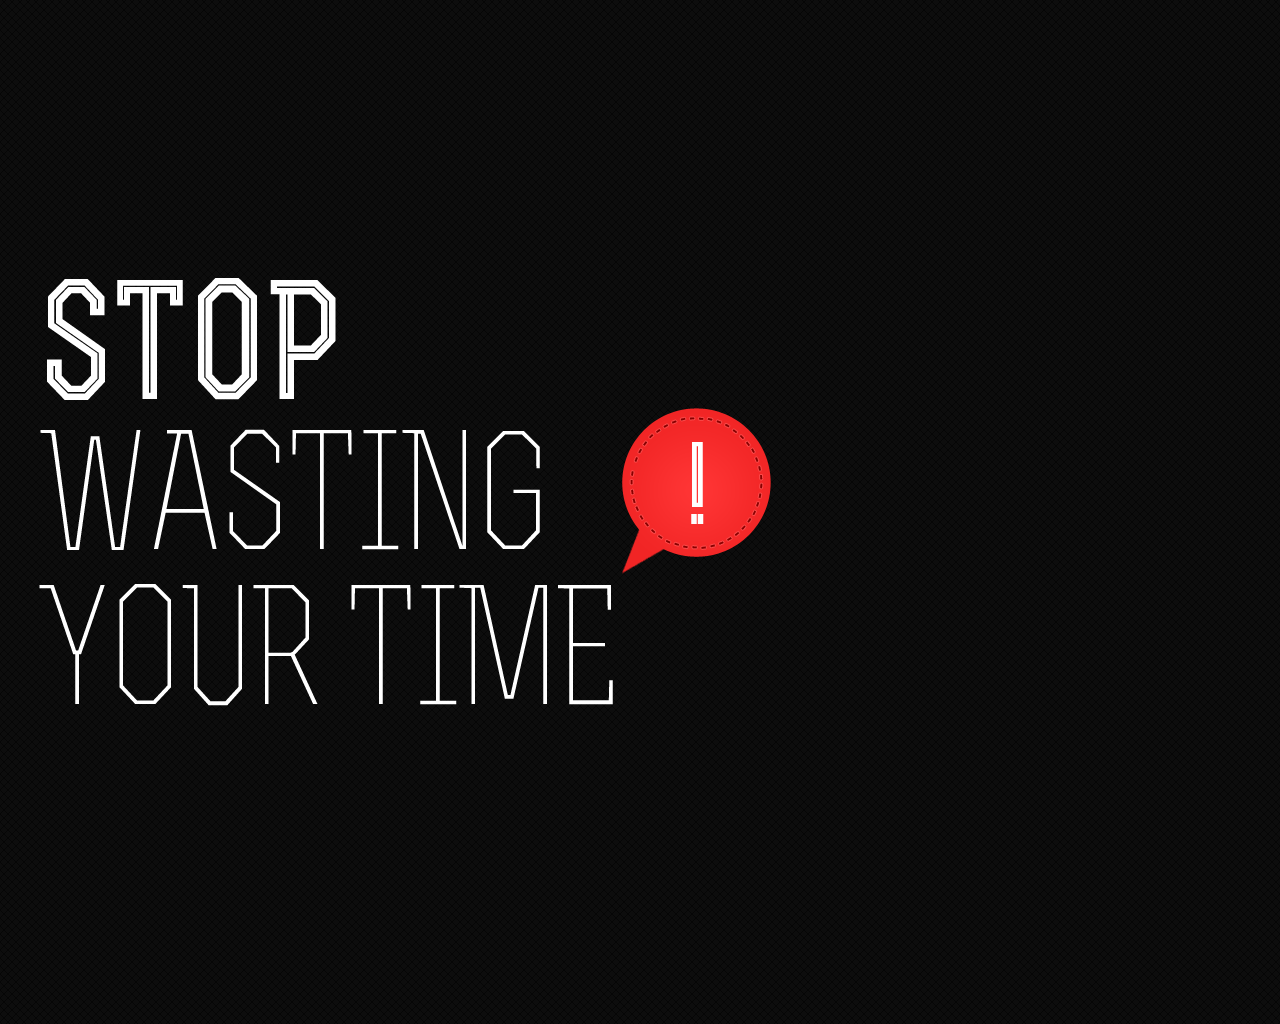 you are wasting your time